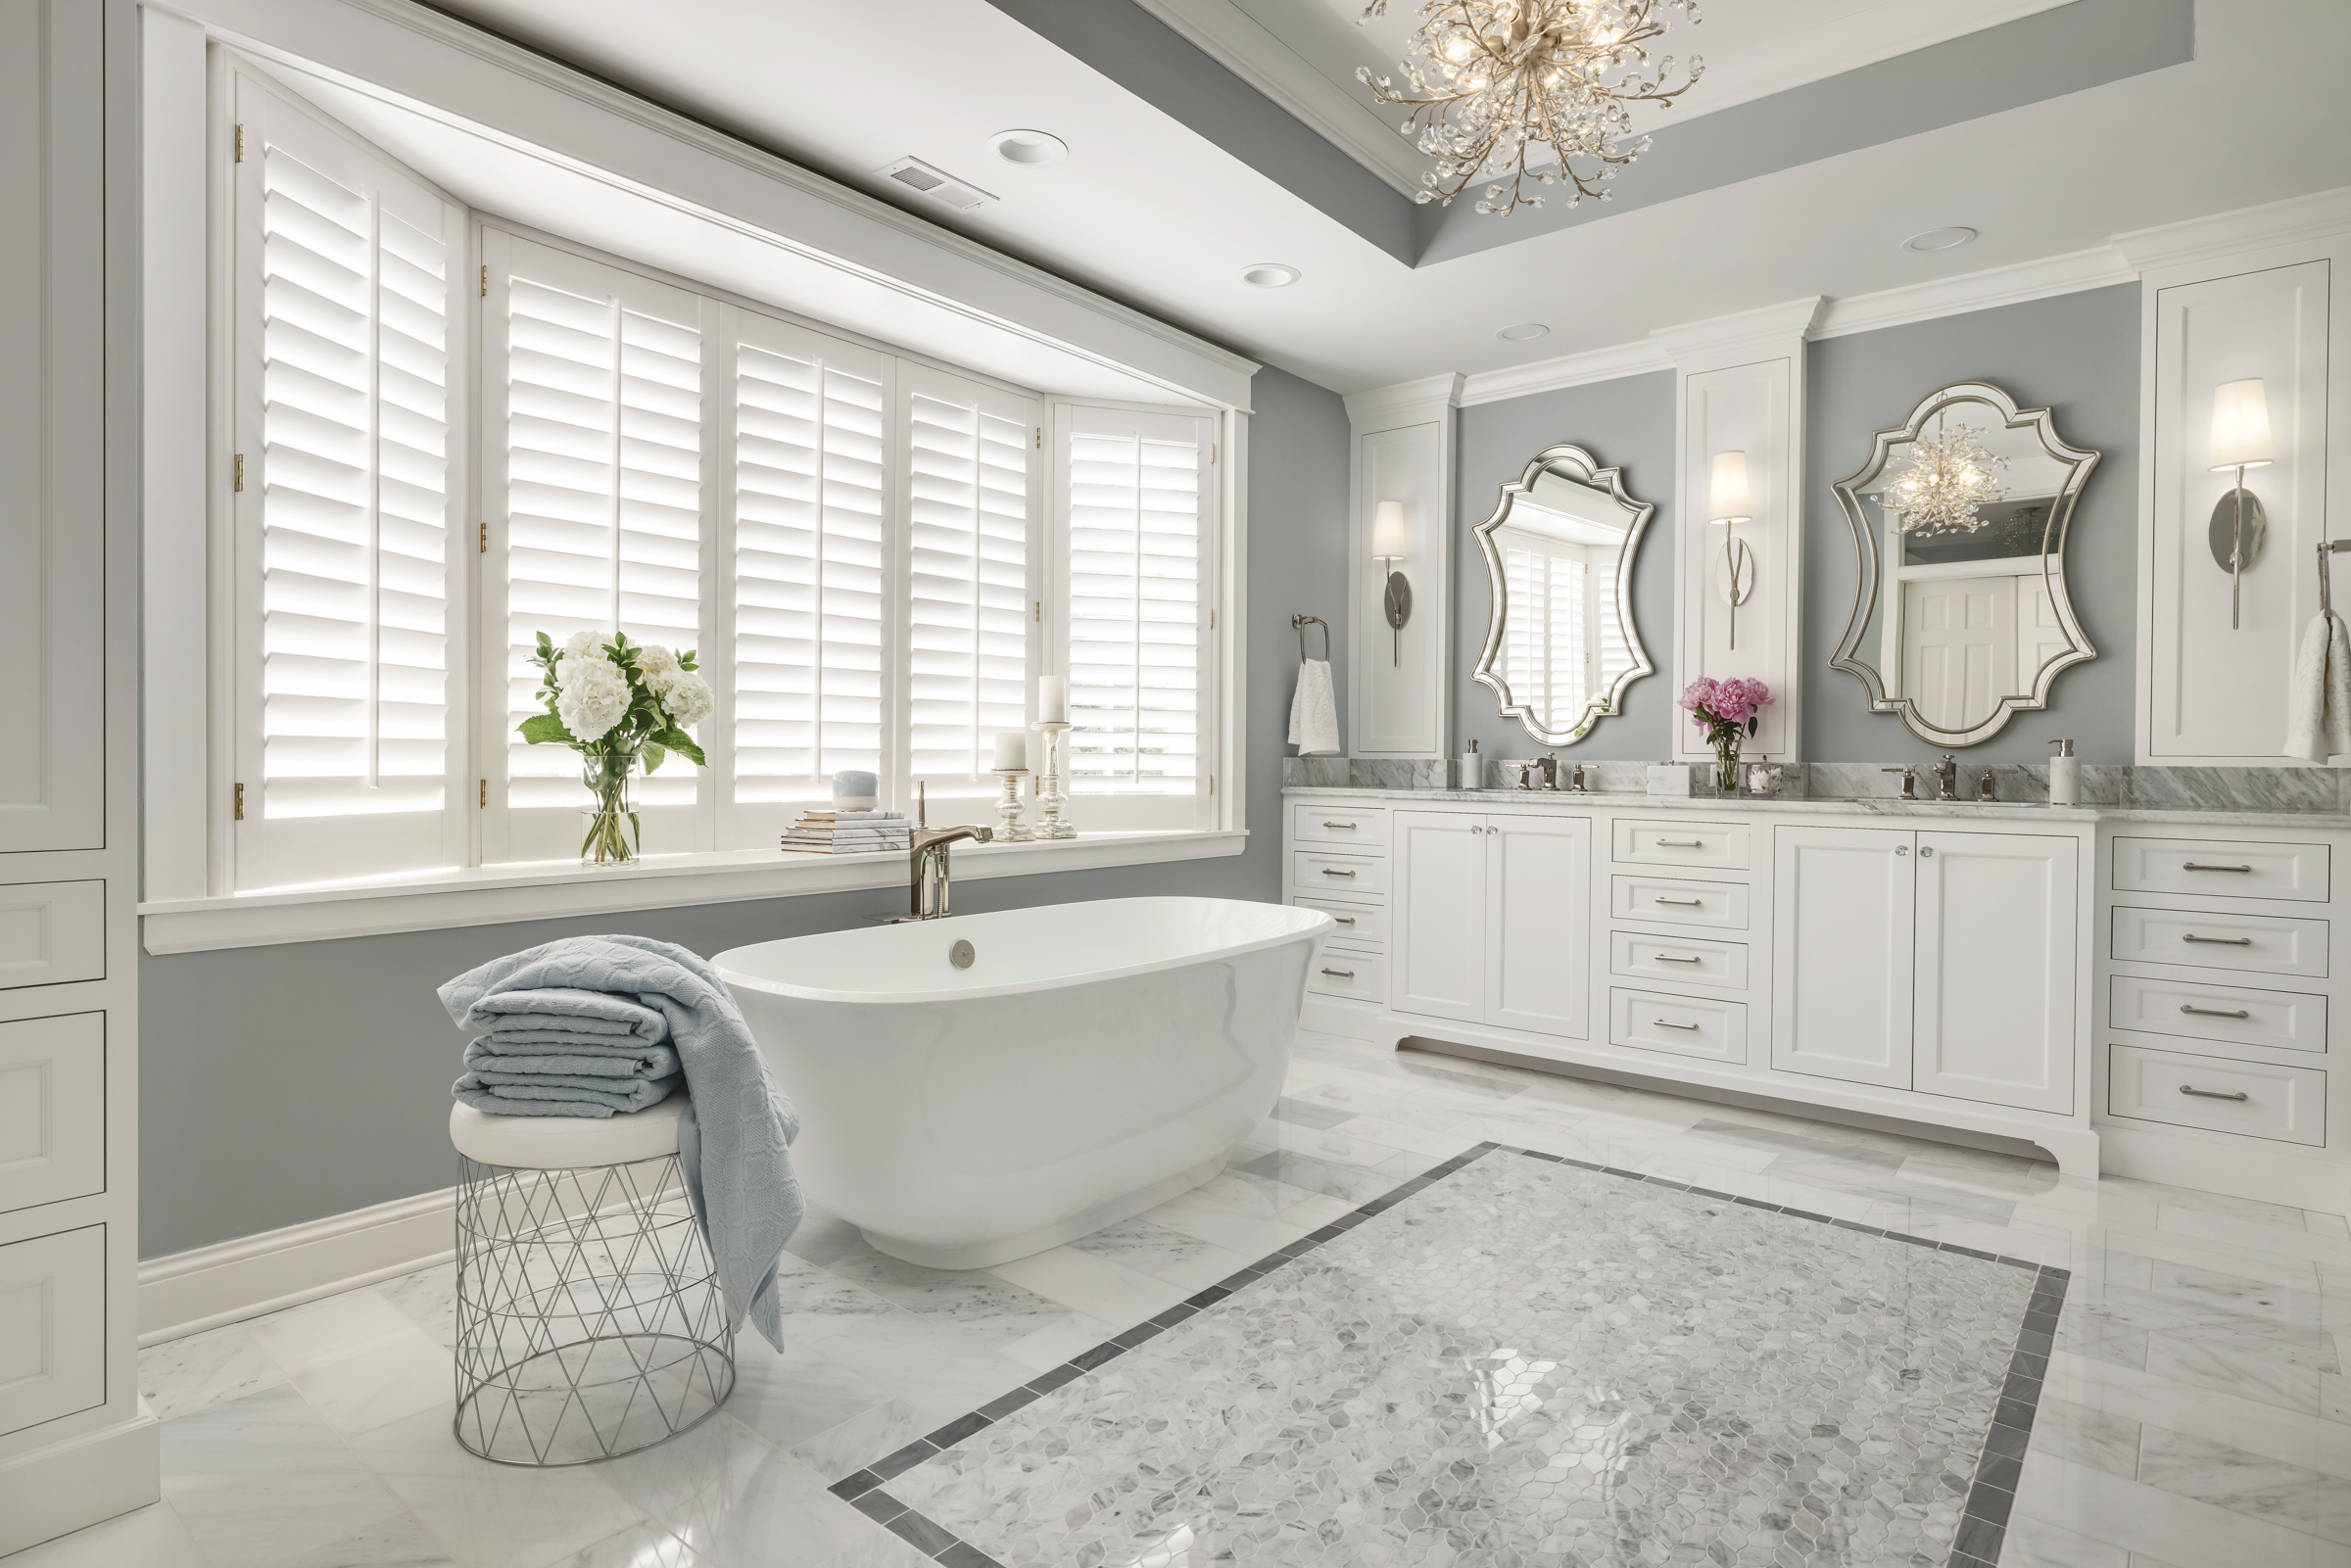 Primary bathroom with marble floor tile, large soaker tub, double vanity, and chrome details